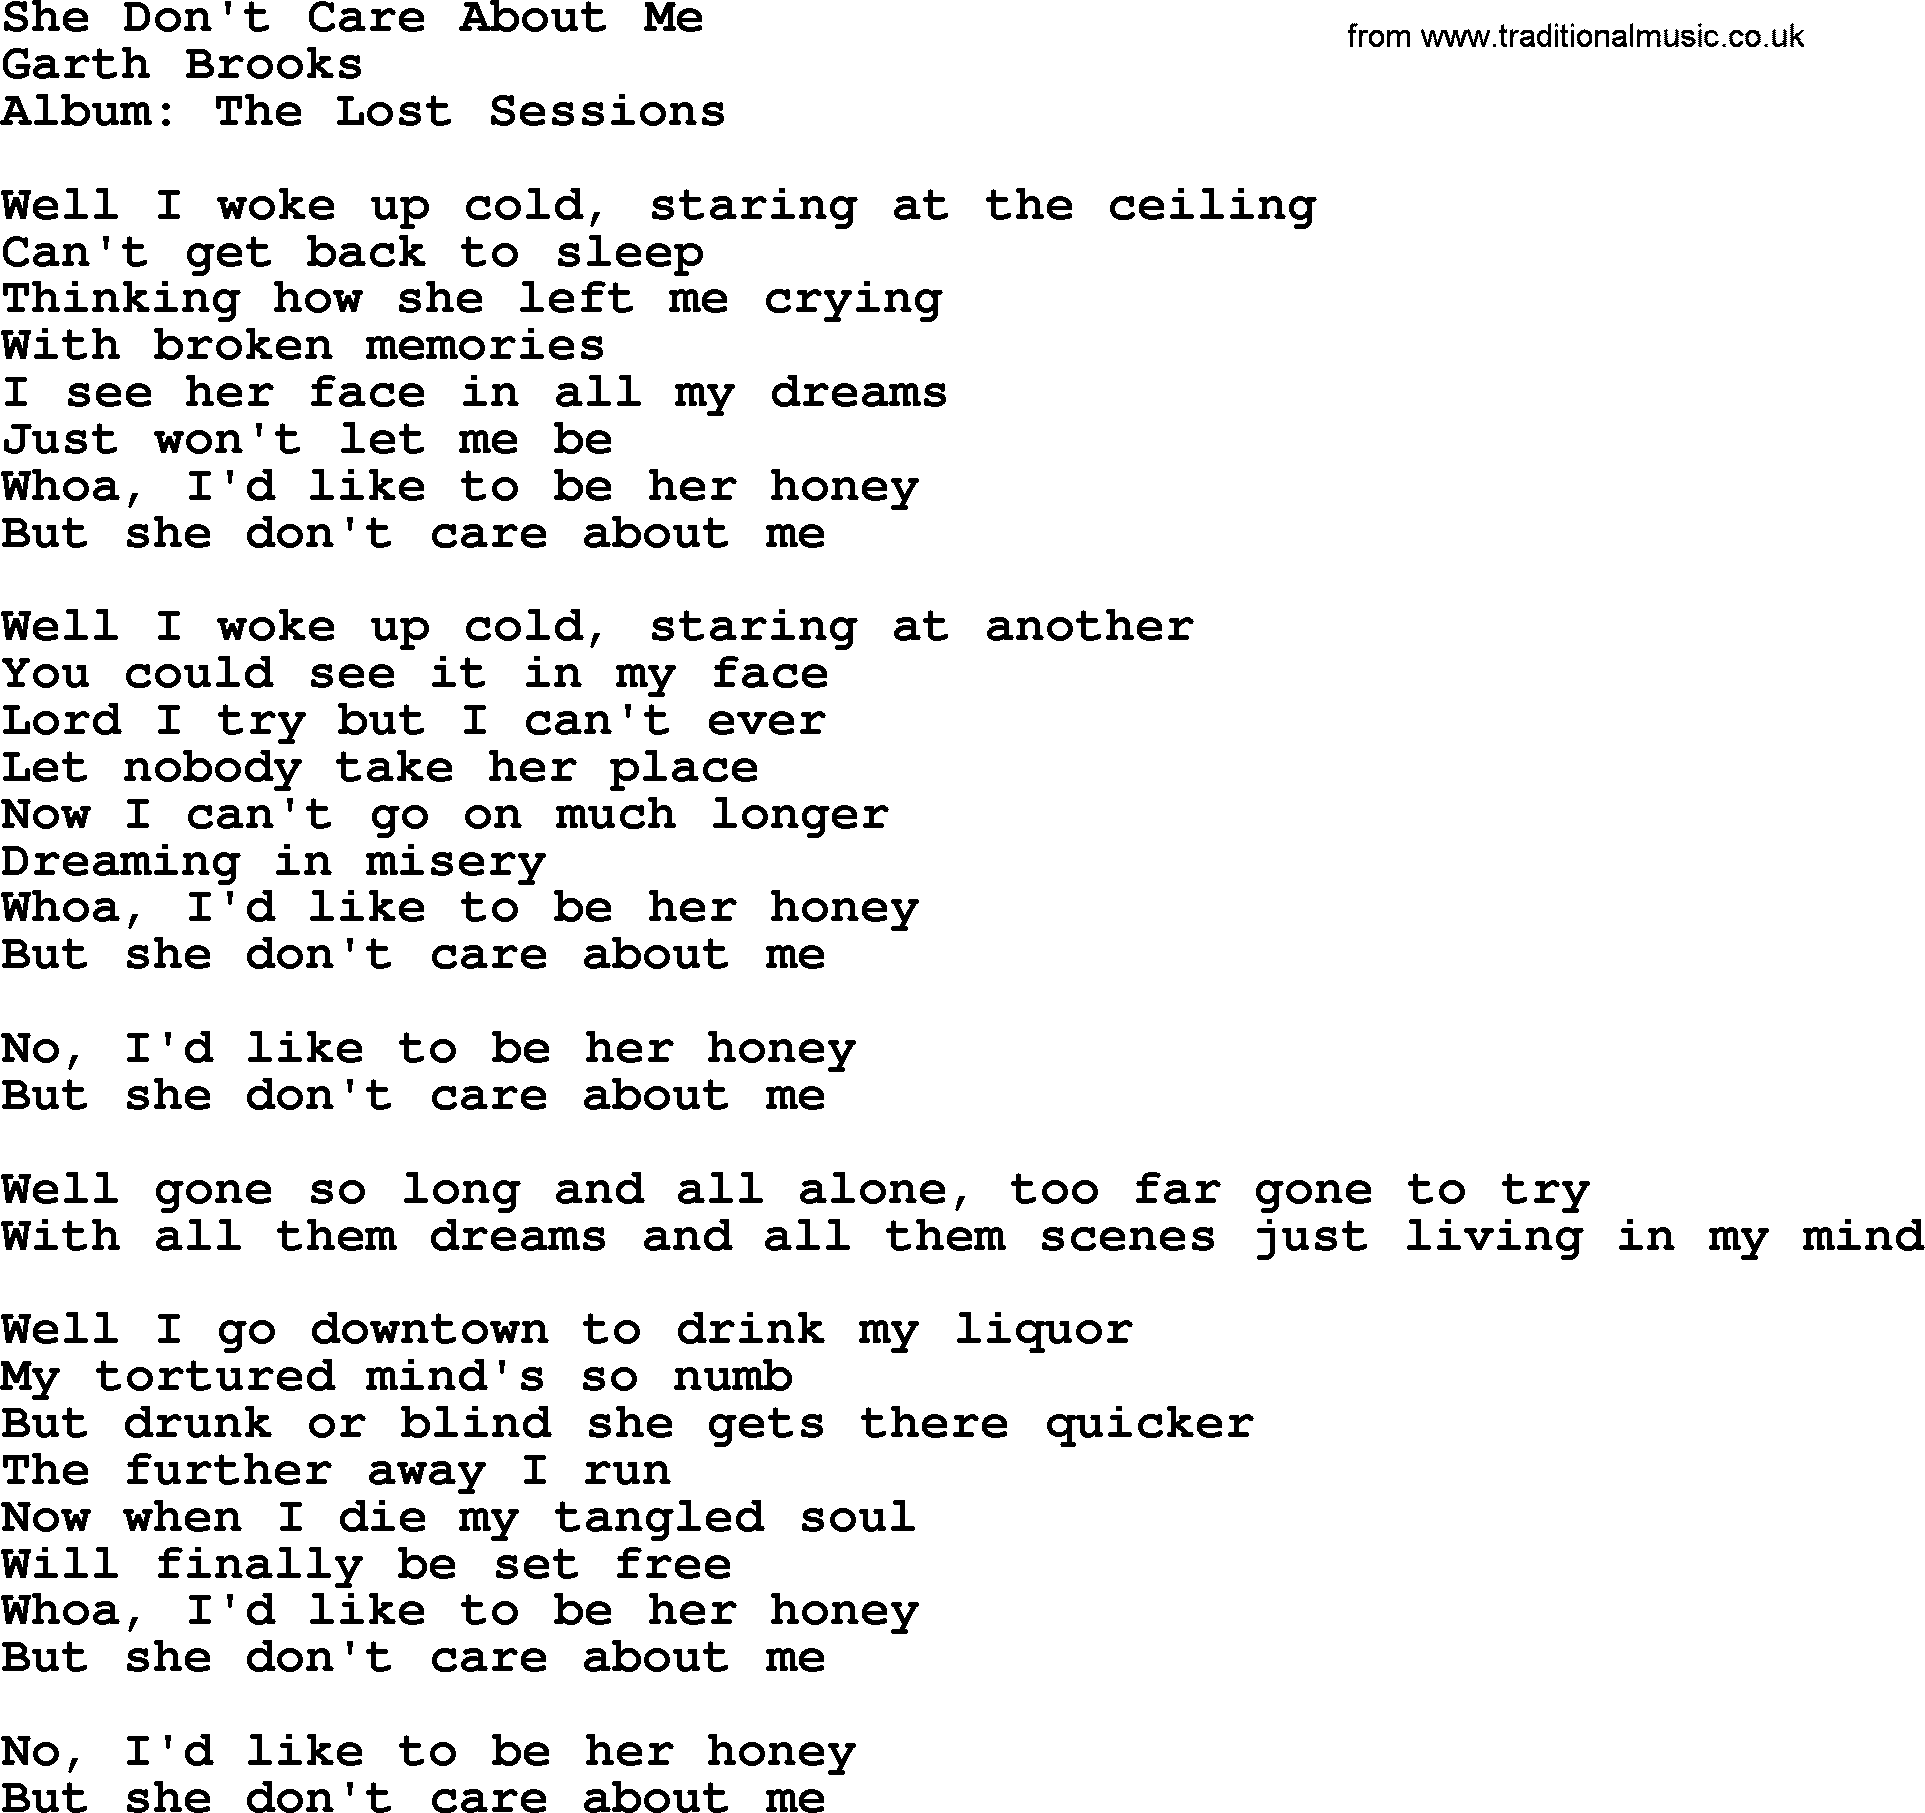 Garth Brooks song: She Don't Care About Me, lyrics